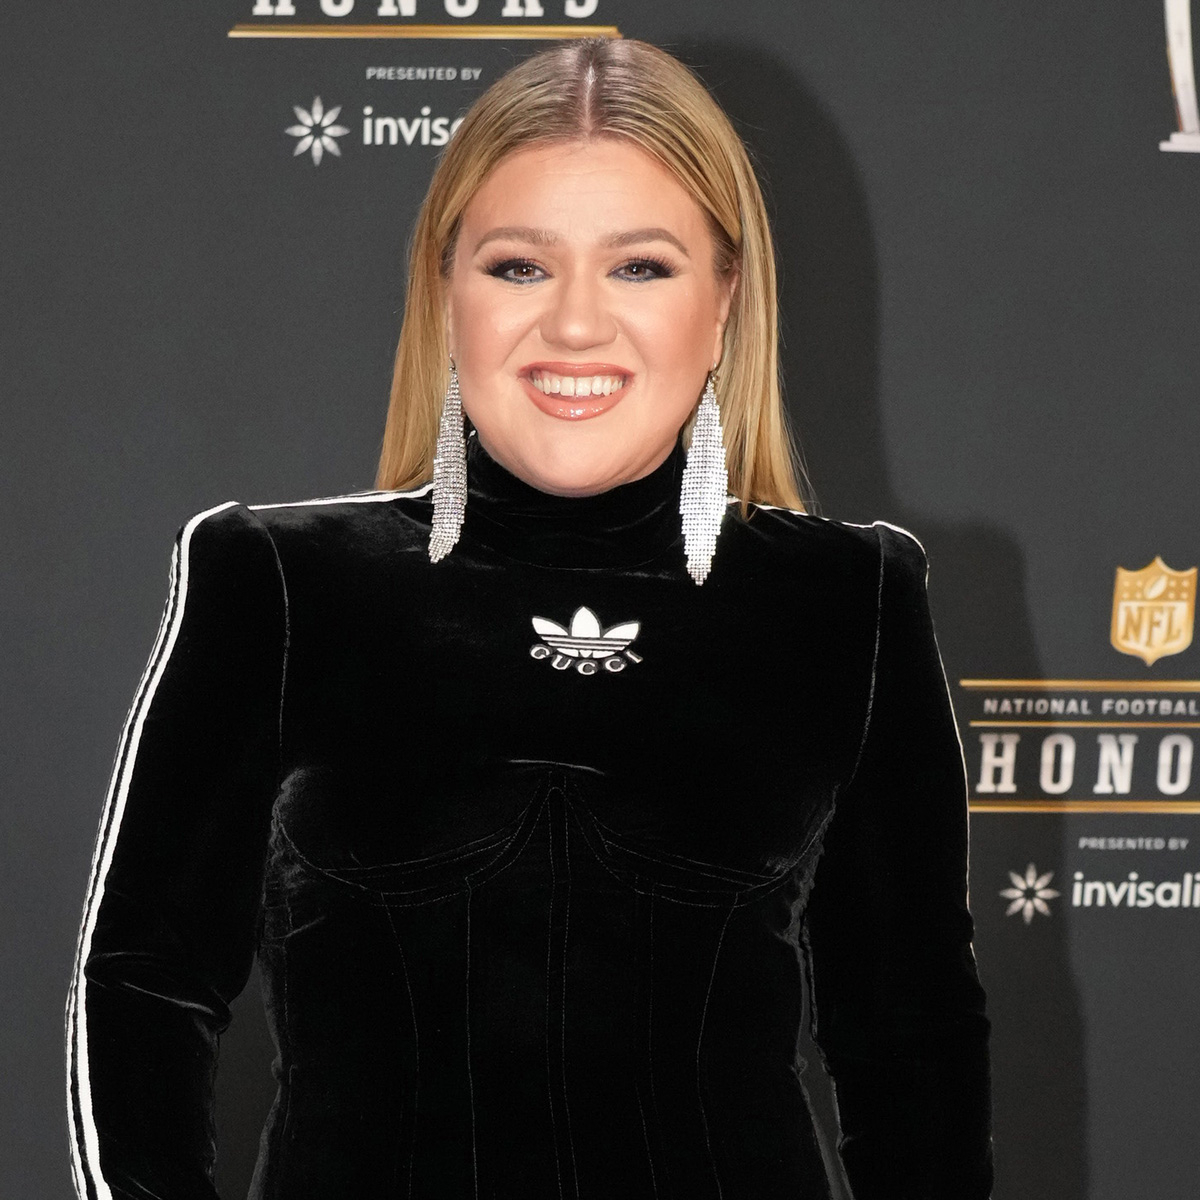 Kelly Clarkson to Make a Musical Comeback With New Album